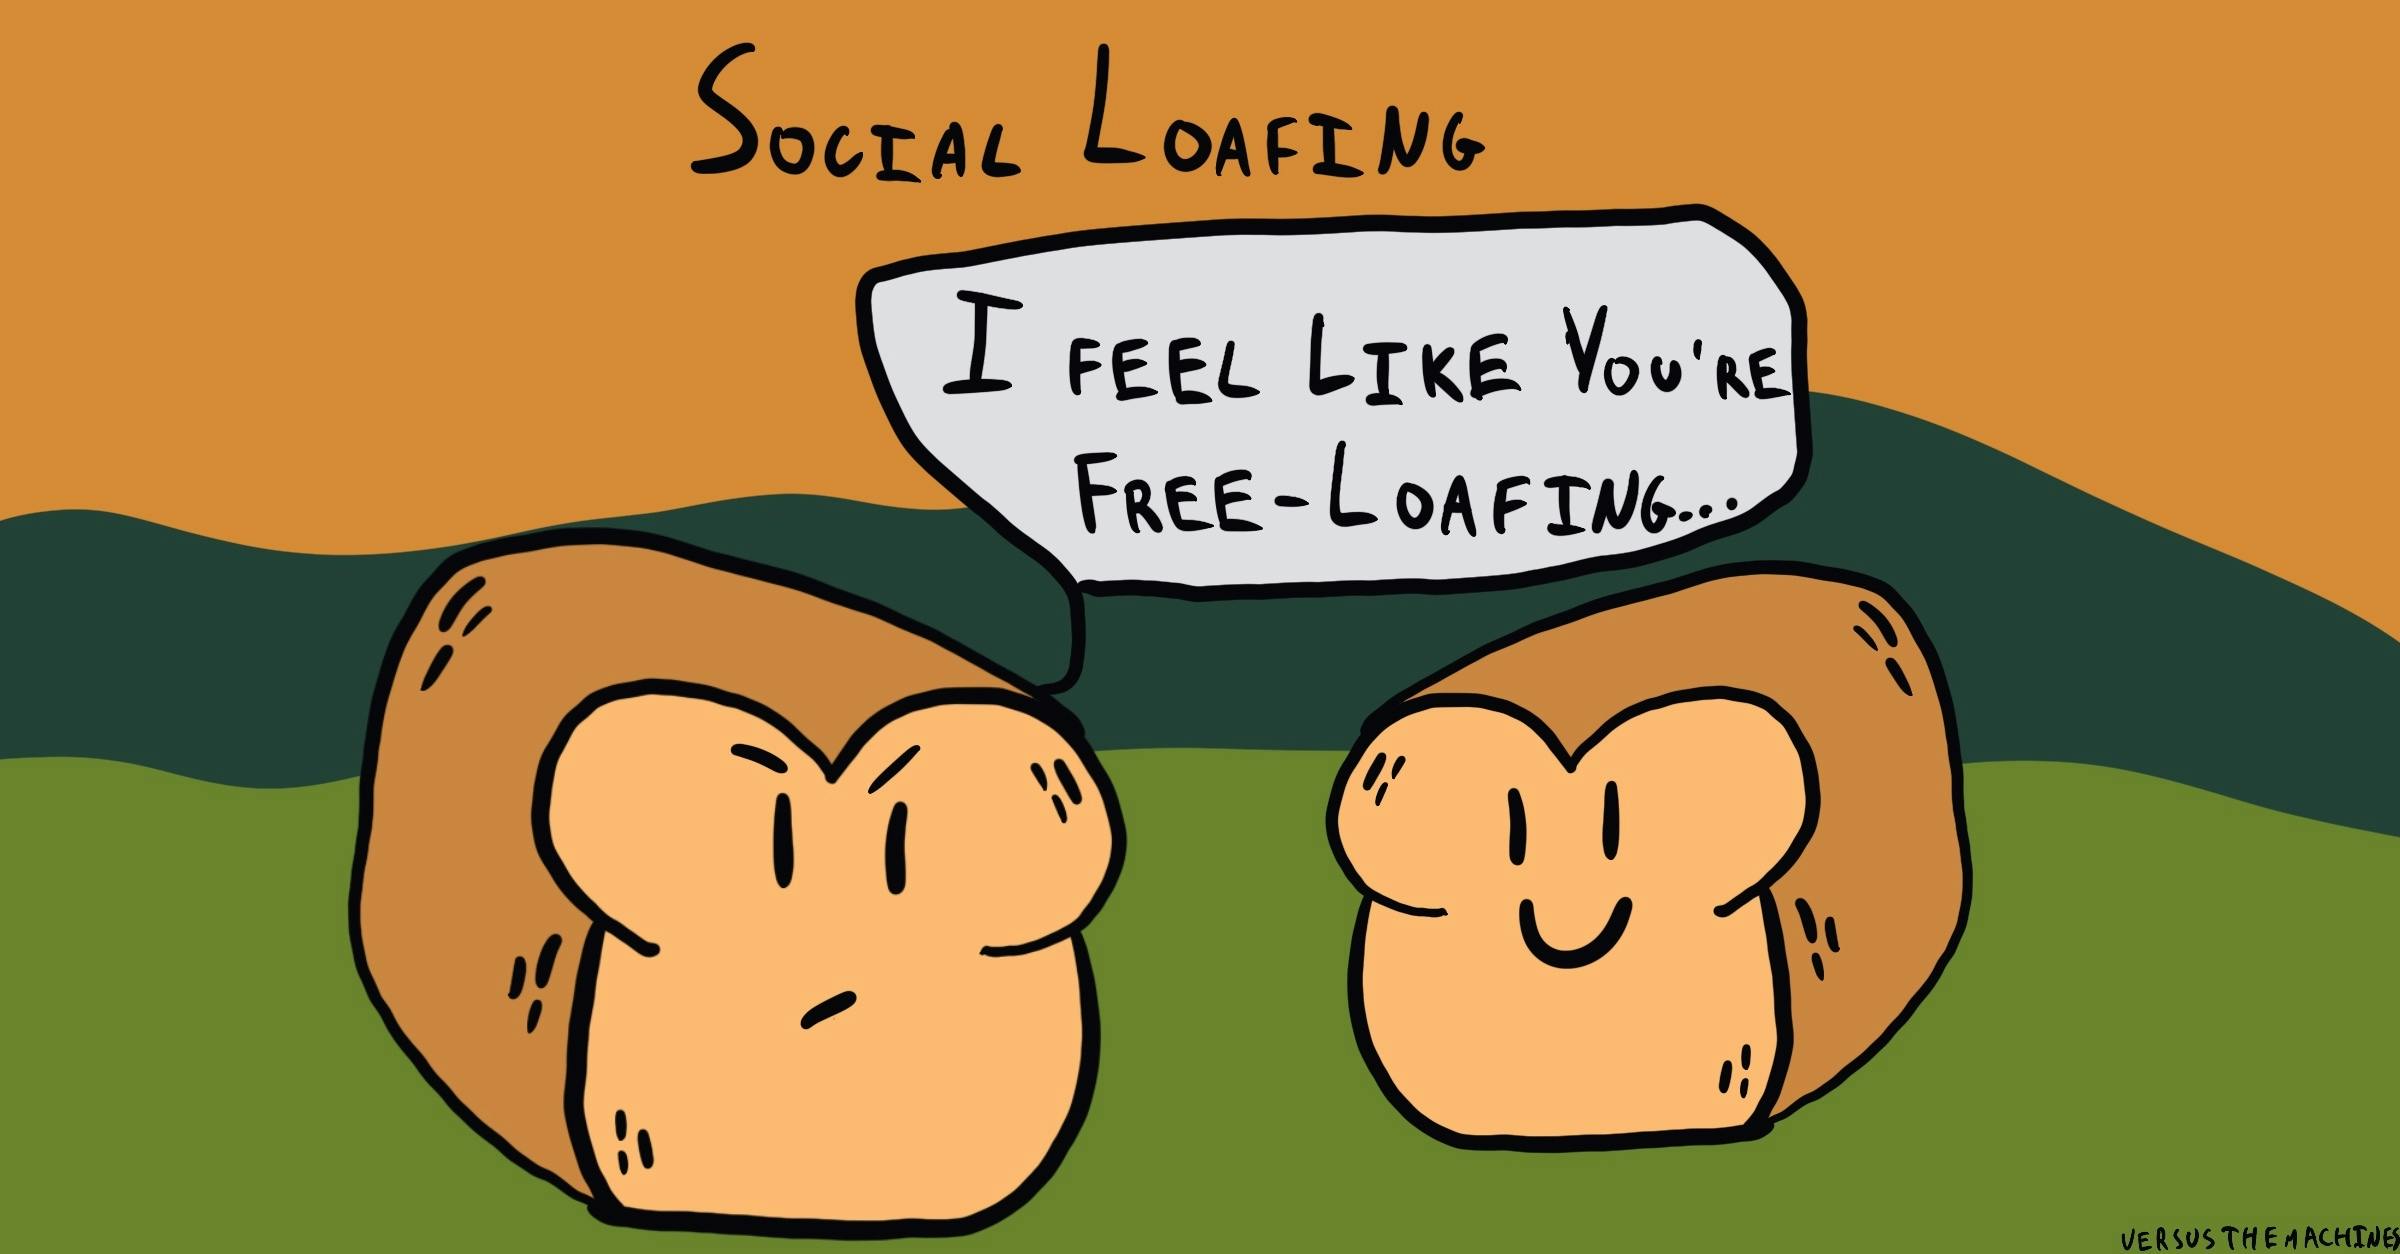 Two loafs conversing with one loaf saying "I feel like you're free-loafing"